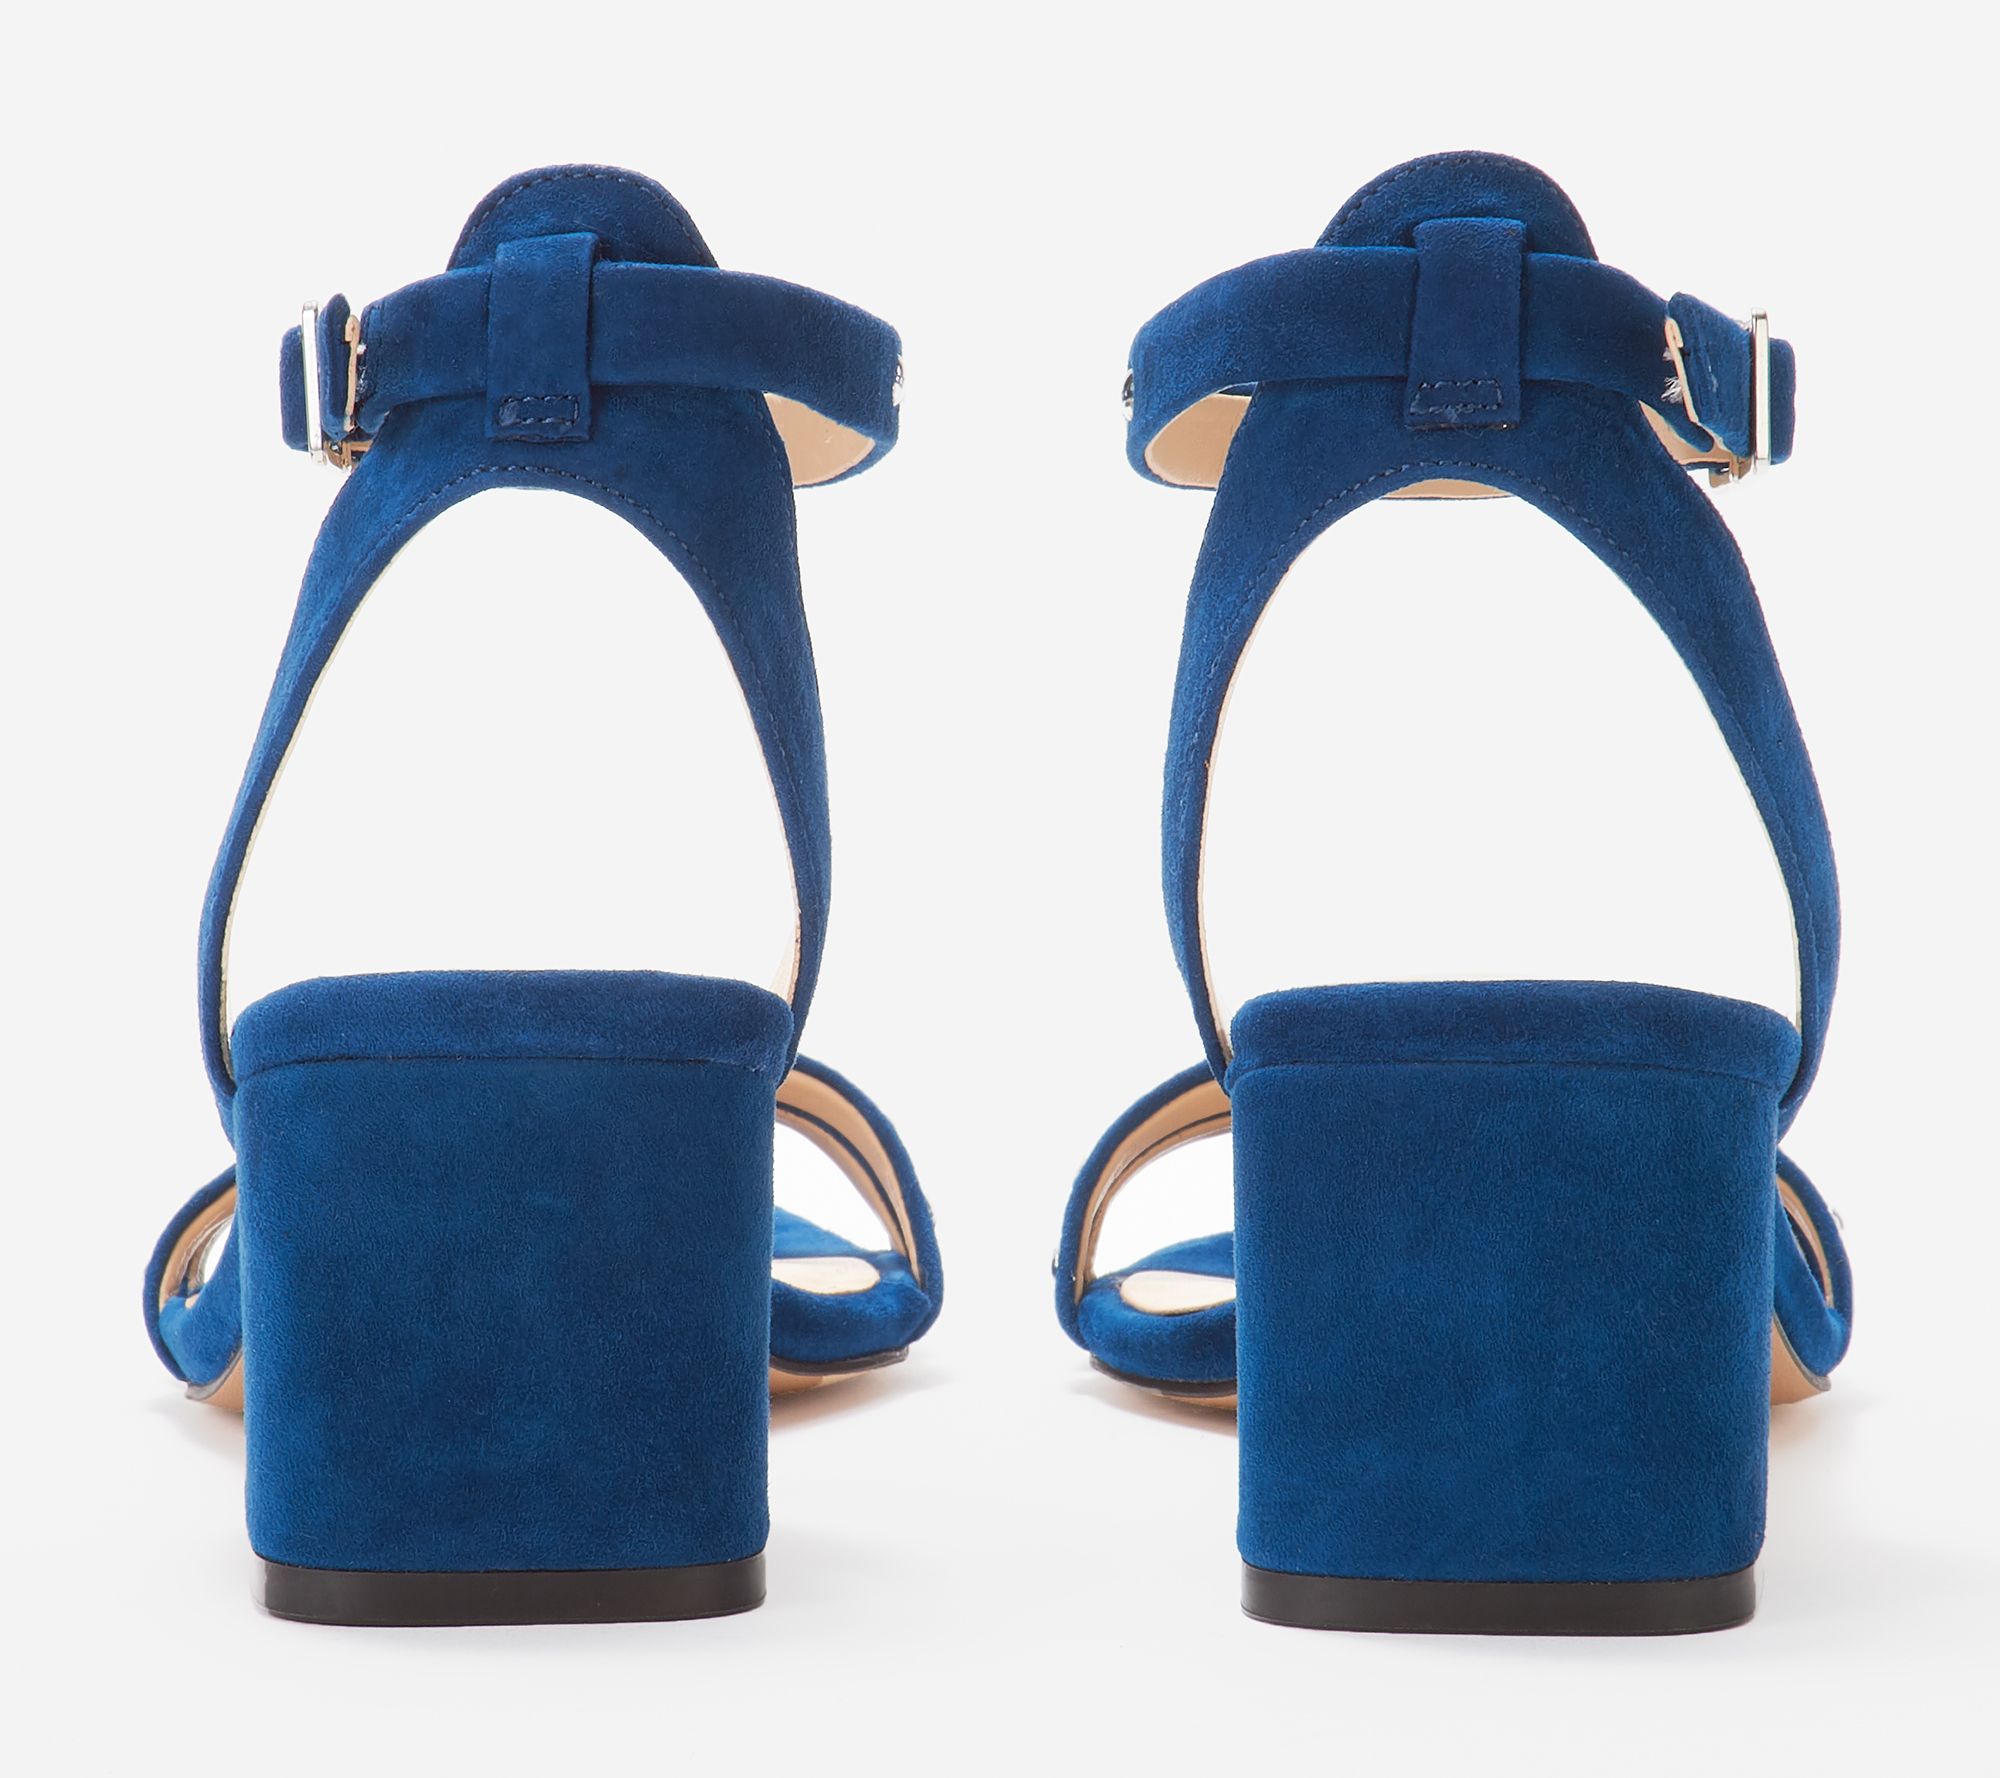 Sole Society Suede Ankle Strap Sandals with Studs- Hezzter - QVC.com